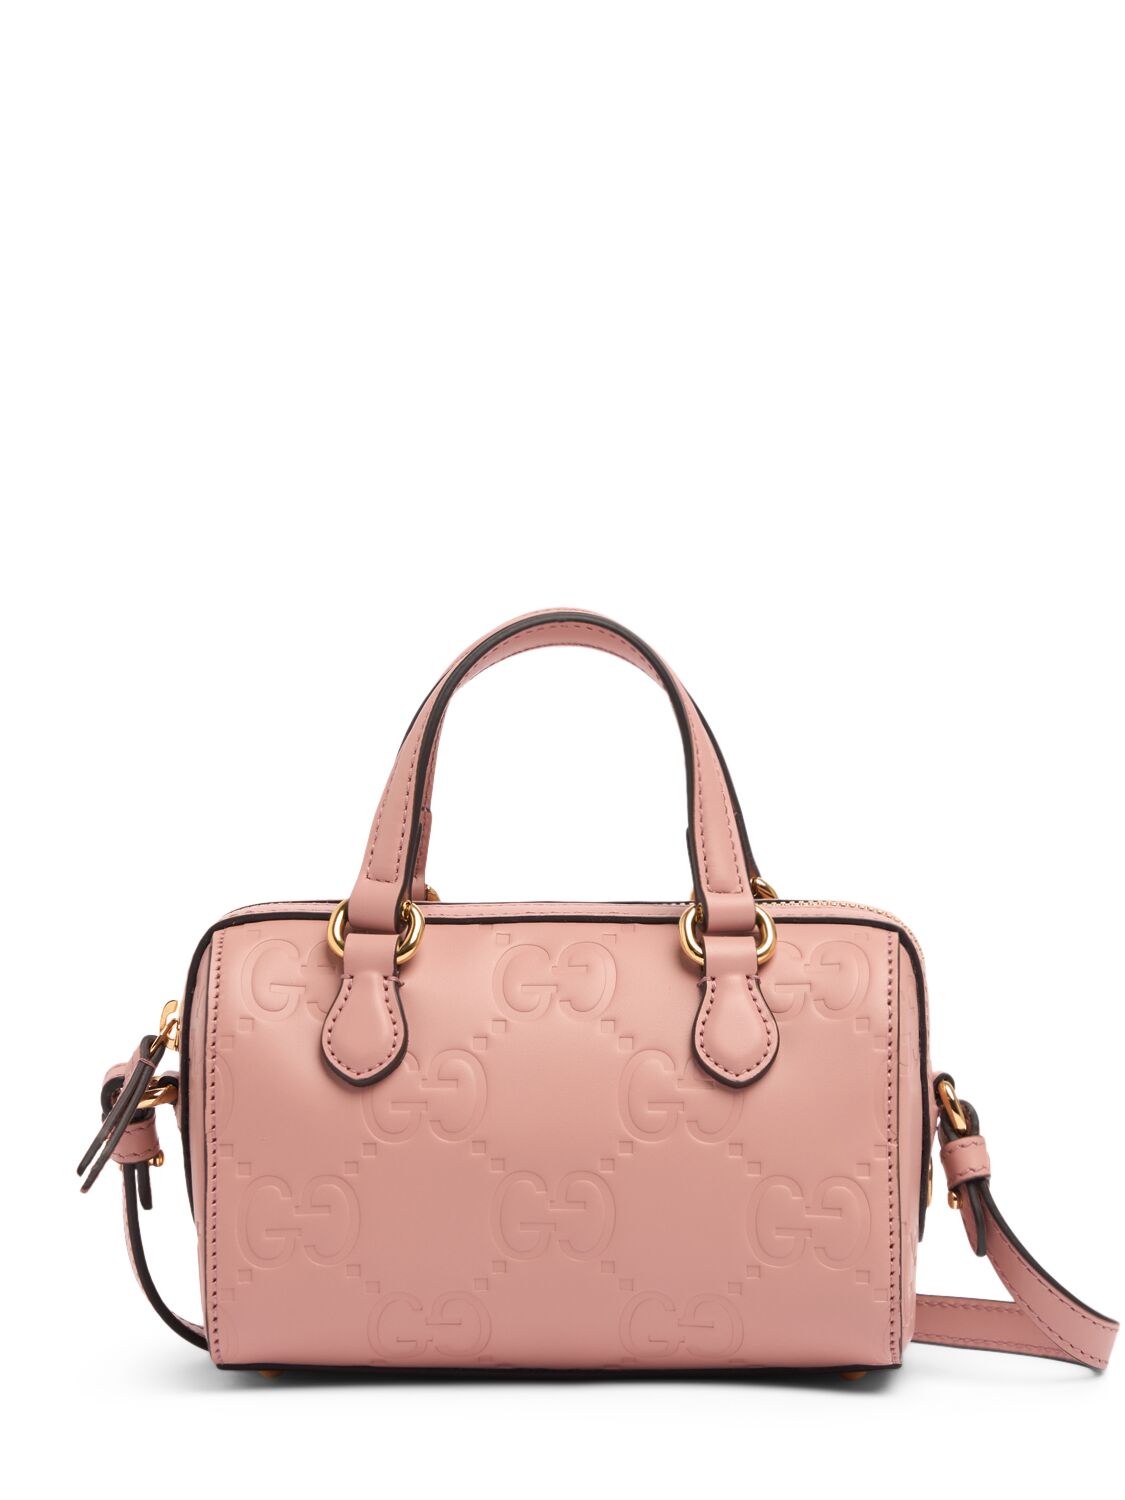 Gucci Mini Gg Leather Shoulder Bag In Pink